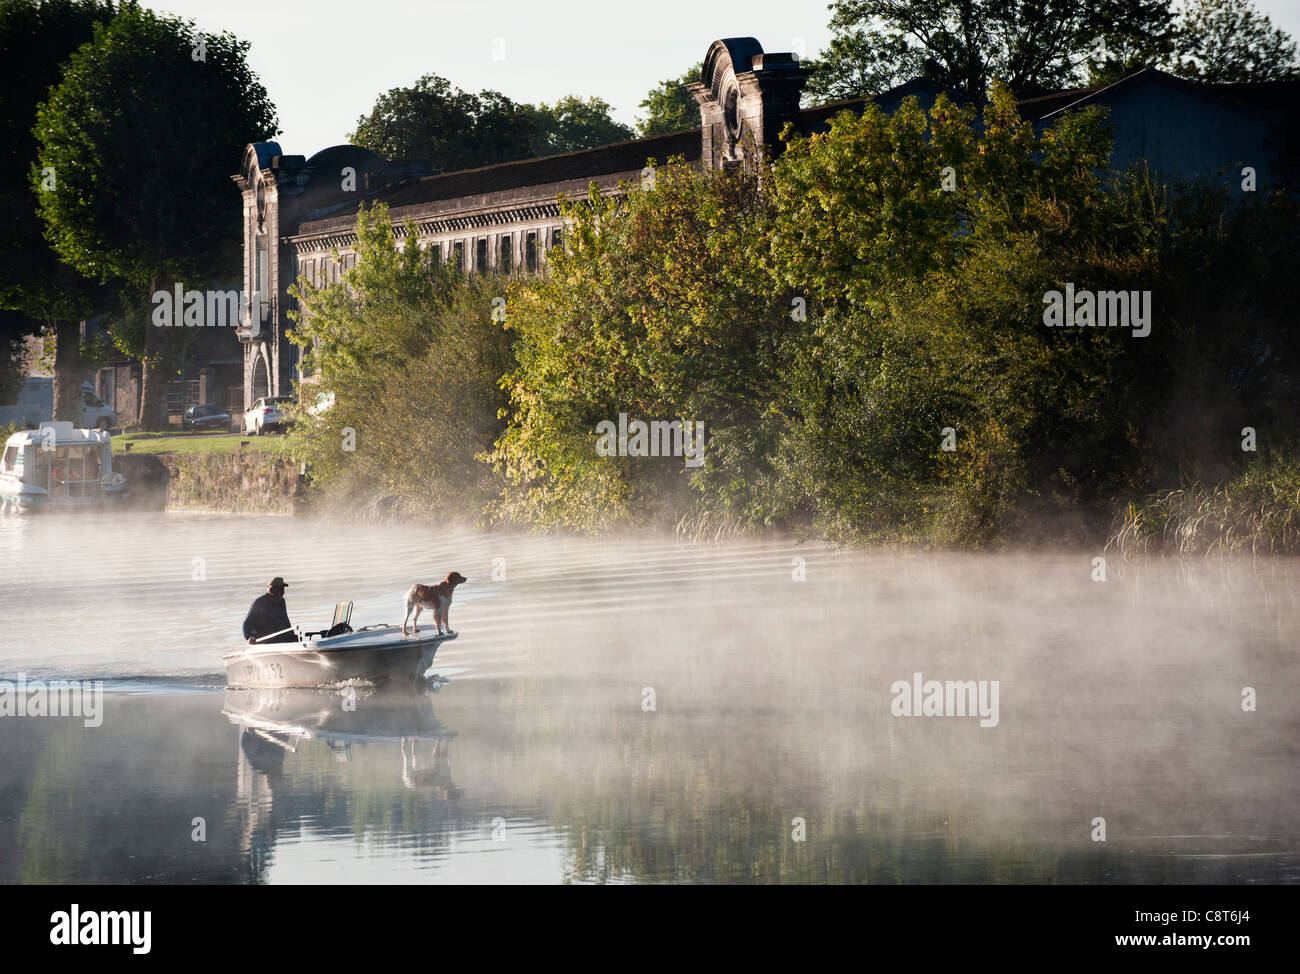 A man on a boat passes by the cognac house of Tiffon, on the banks of the Charente river, Jarnac, Charente departement, France Stock Photo